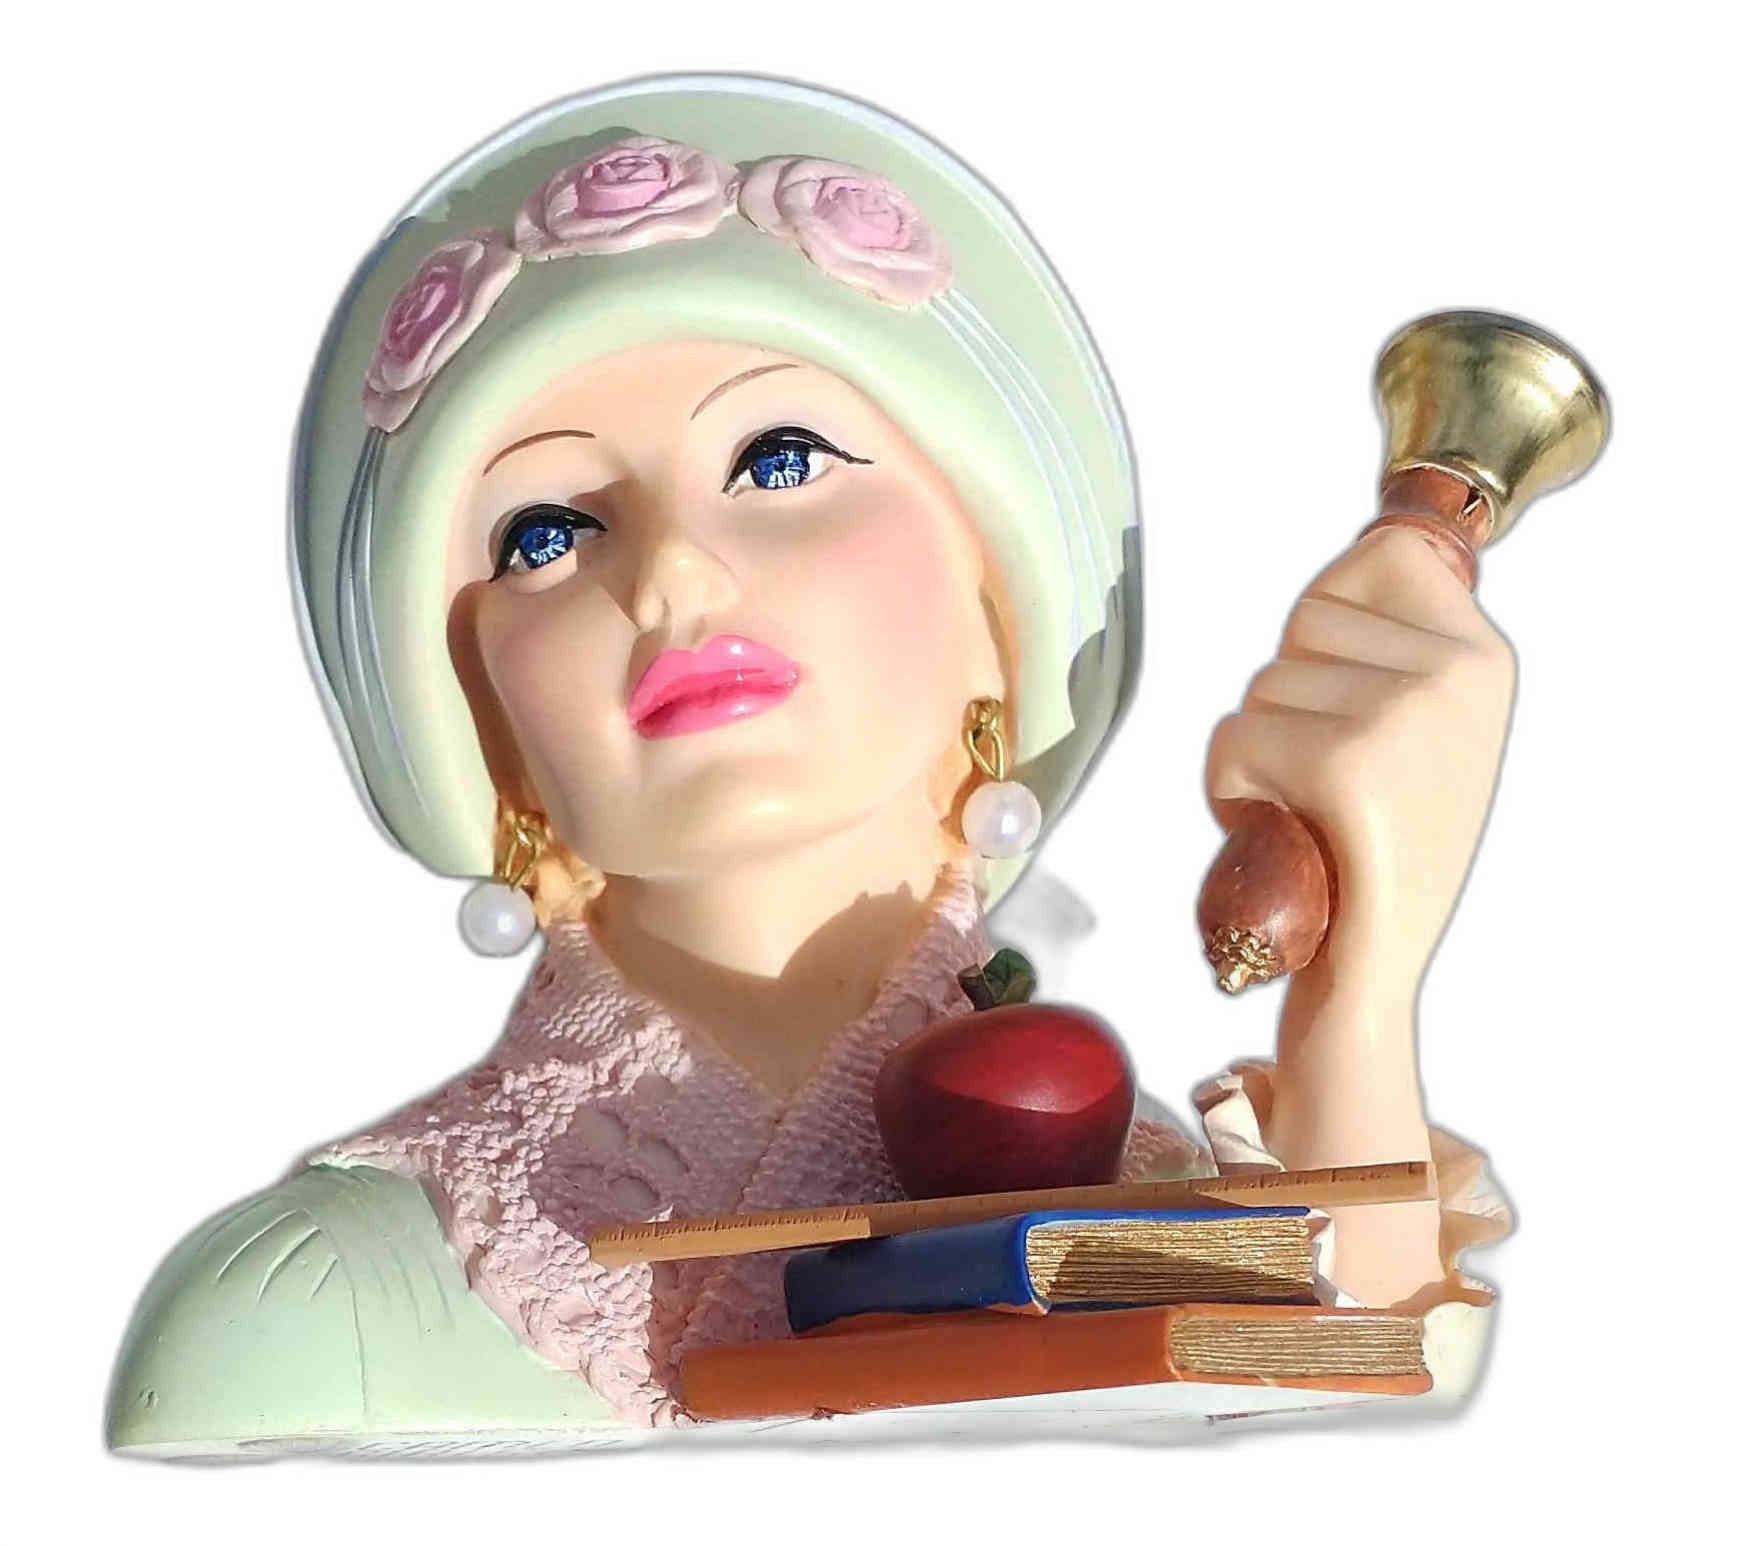 Cameo Girls Lady Vase “JUDITH 1936”. “I DO” Special Deluxe Edition 2004 LV-078